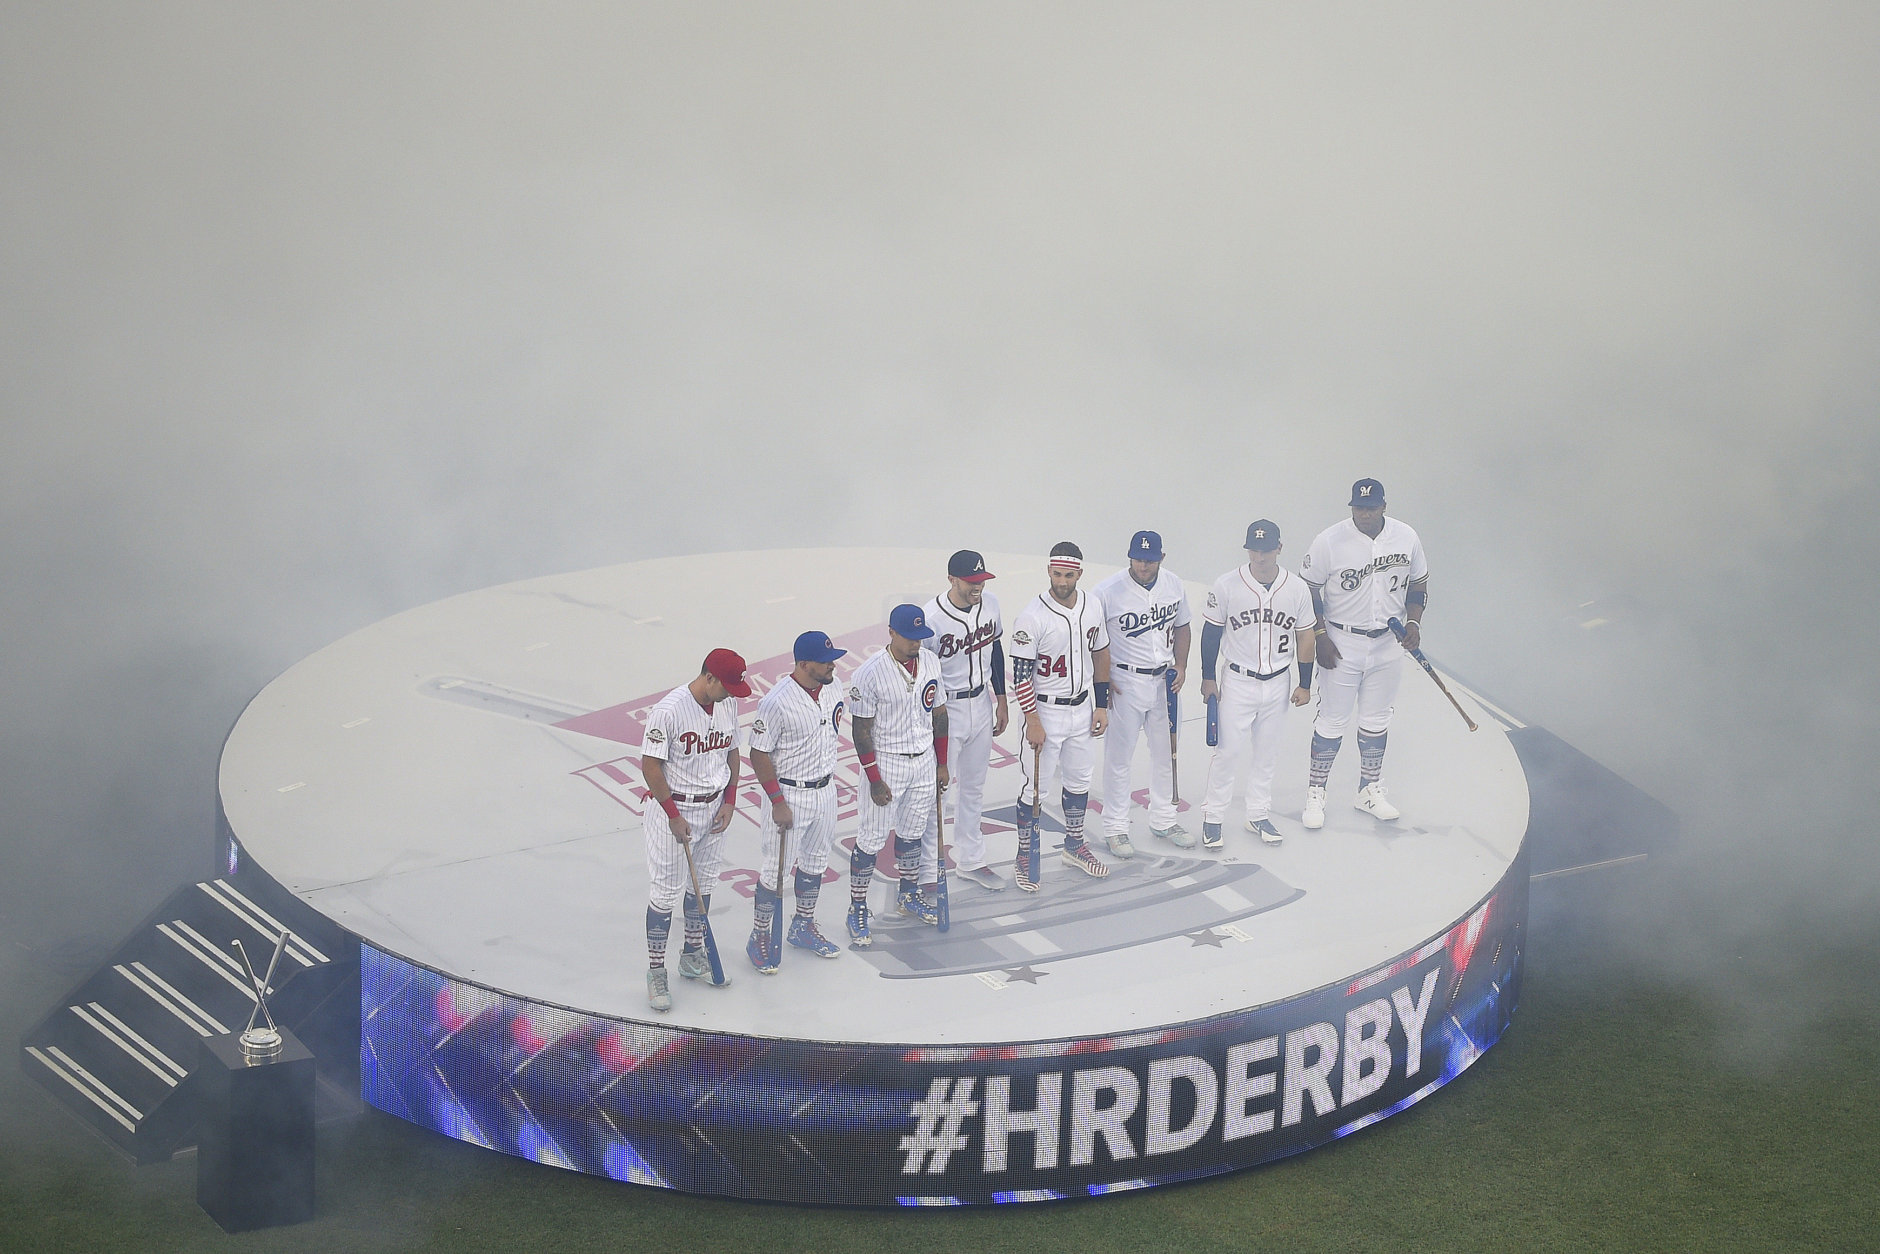 MLB players line up before the MLB Home Run Derby, at Nationals Park, Monday, July 16, 2018 in Washington. The 89th MLB baseball All-Star Game will be played Tuesday. (AP Photo/Nick Wass)